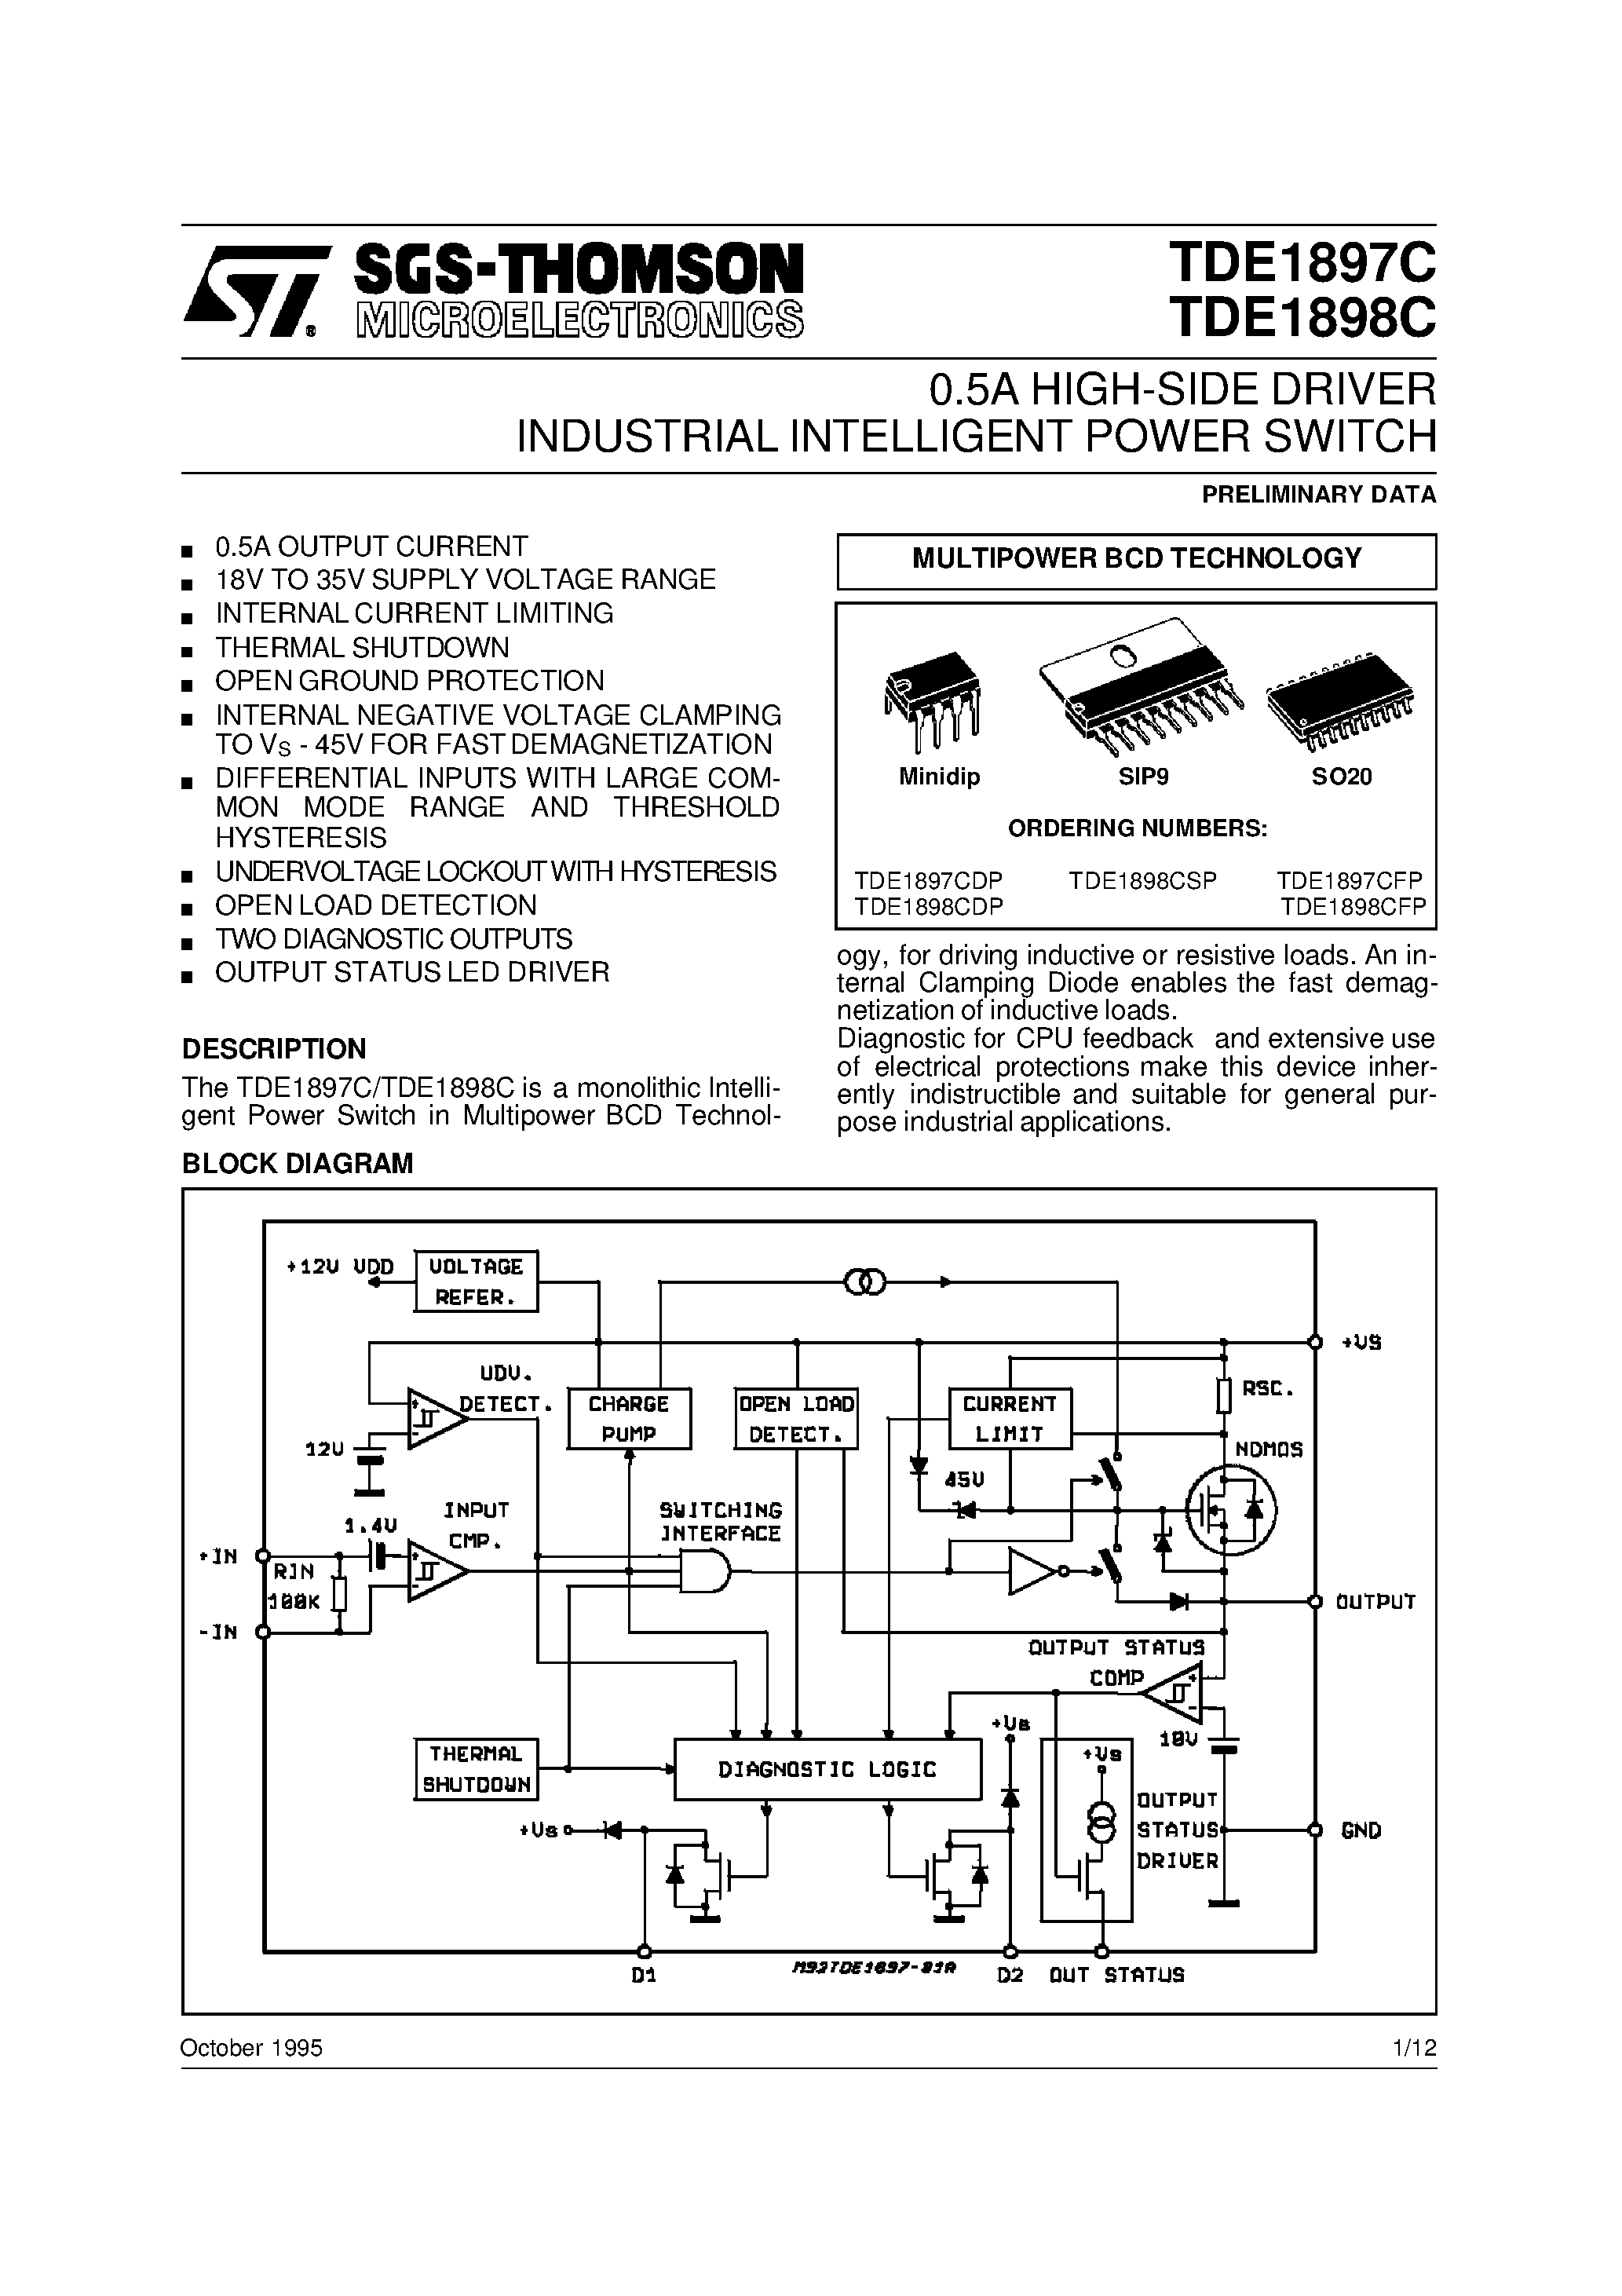 Datasheet TDE1898CSP - 0.5A HIGH-SIDE DRIVER INDUSTRIAL INTELLIGENT POWER SWITCH page 1